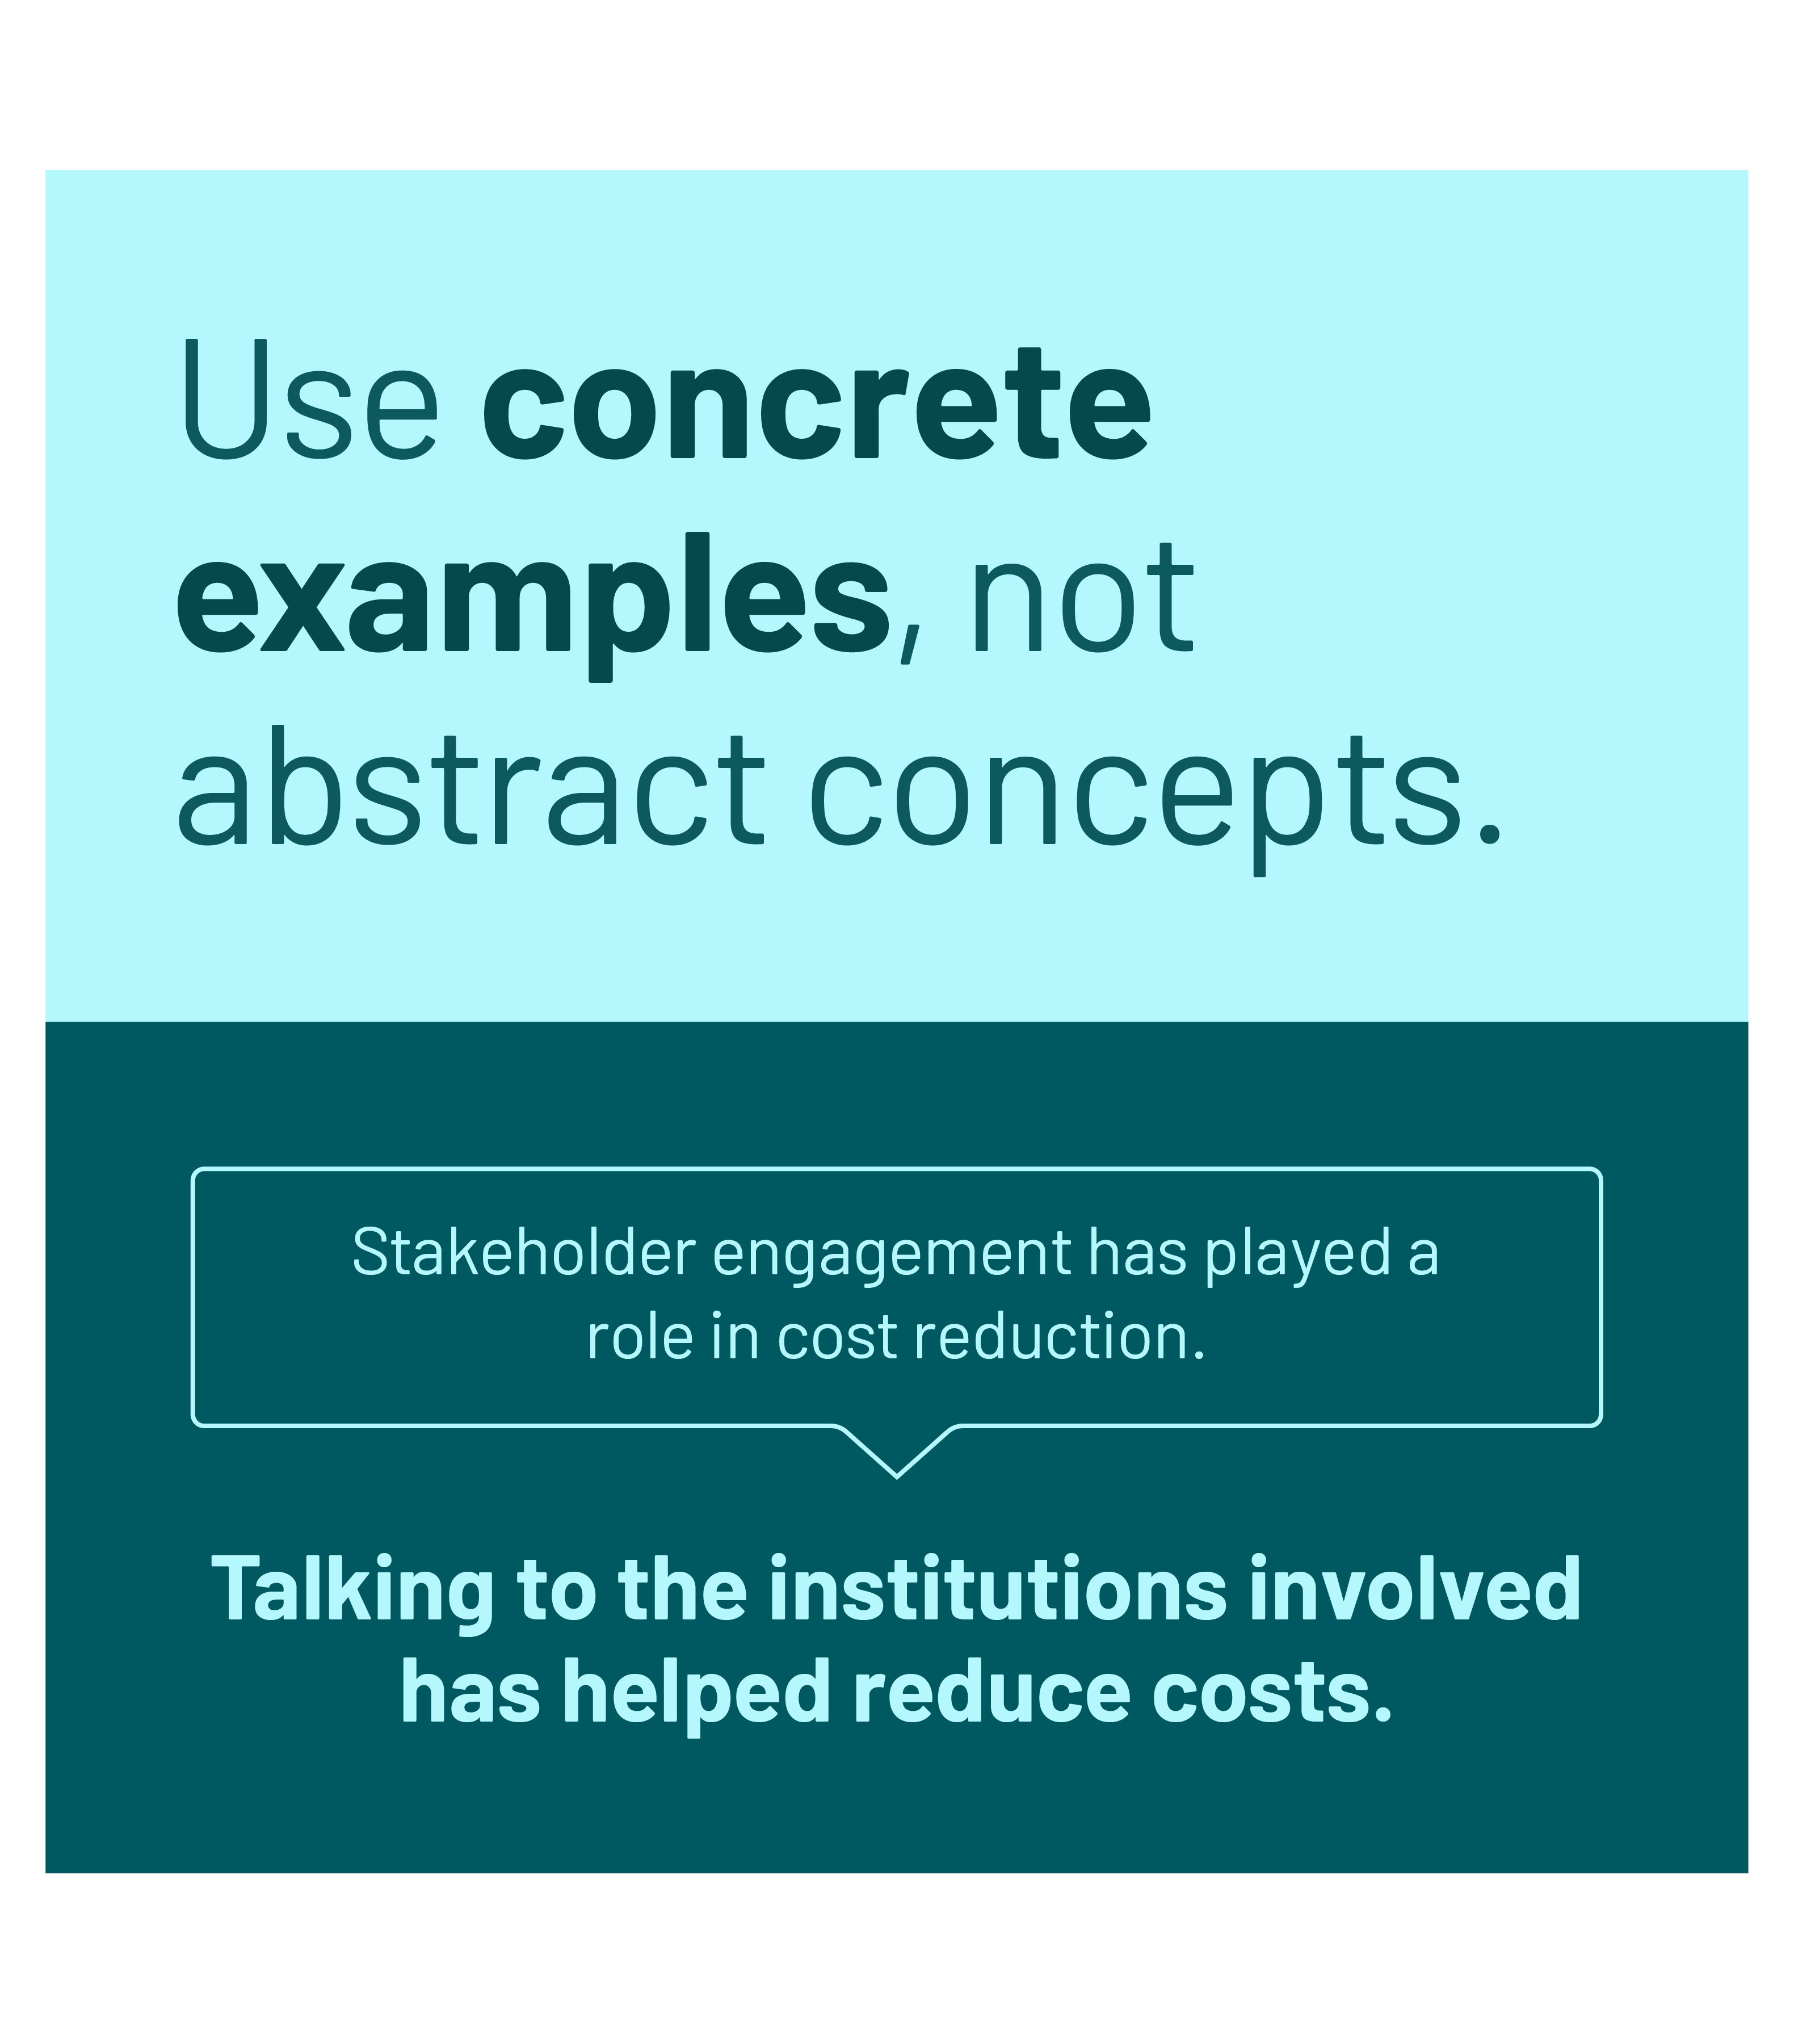 Use concrete examples, not abstract concepts, with example